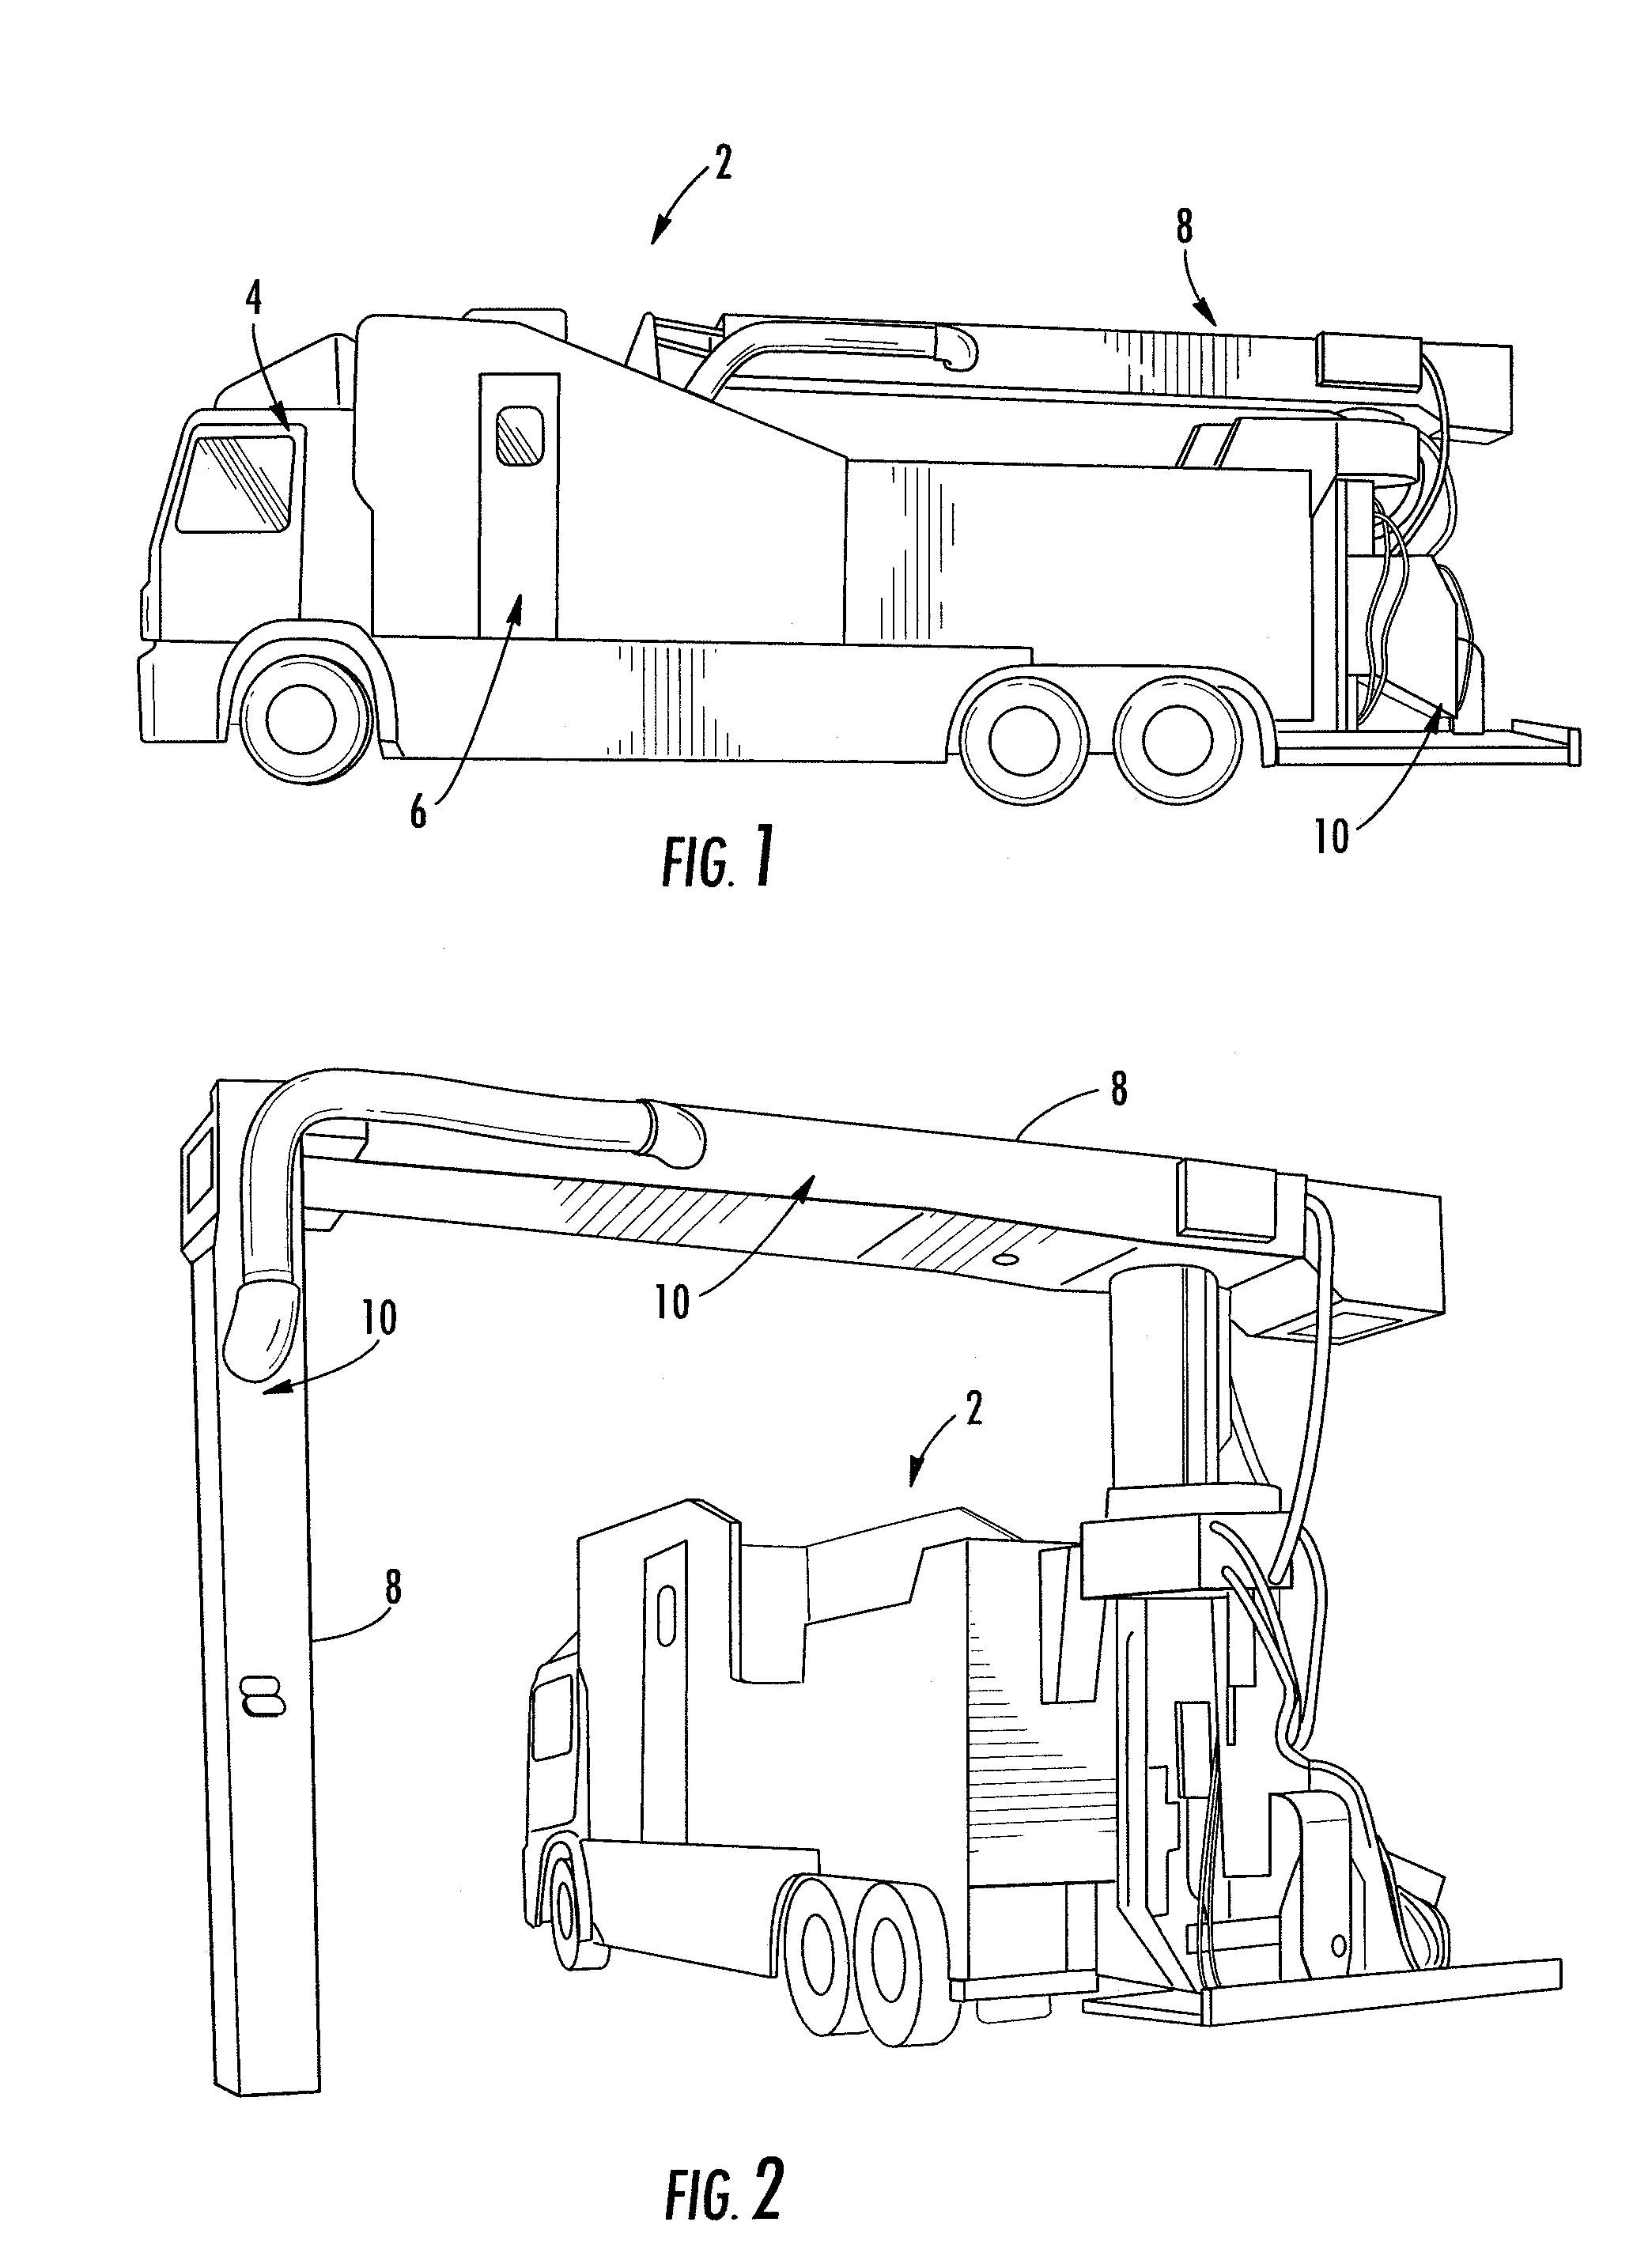 Method and apparatus for scanning objects in transit